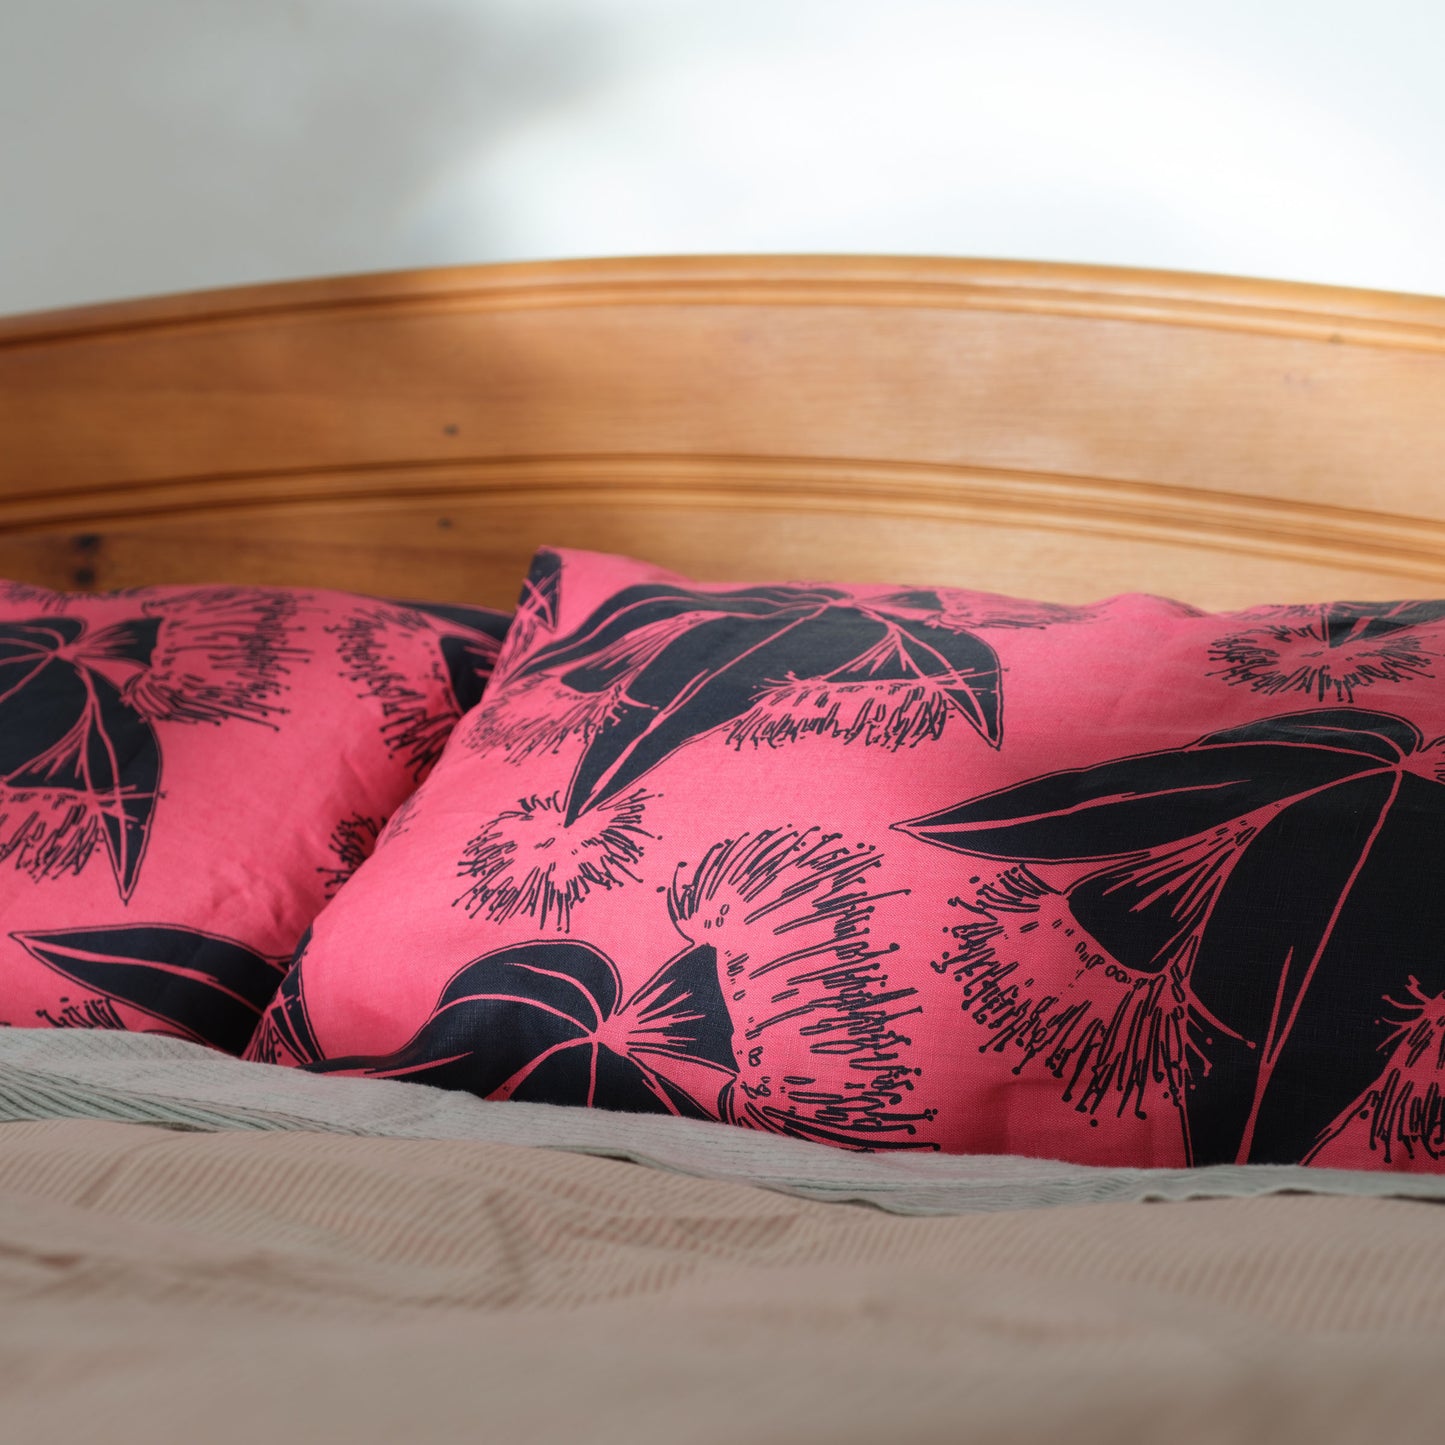 Pillowcases featuring large Flying Gumnuts